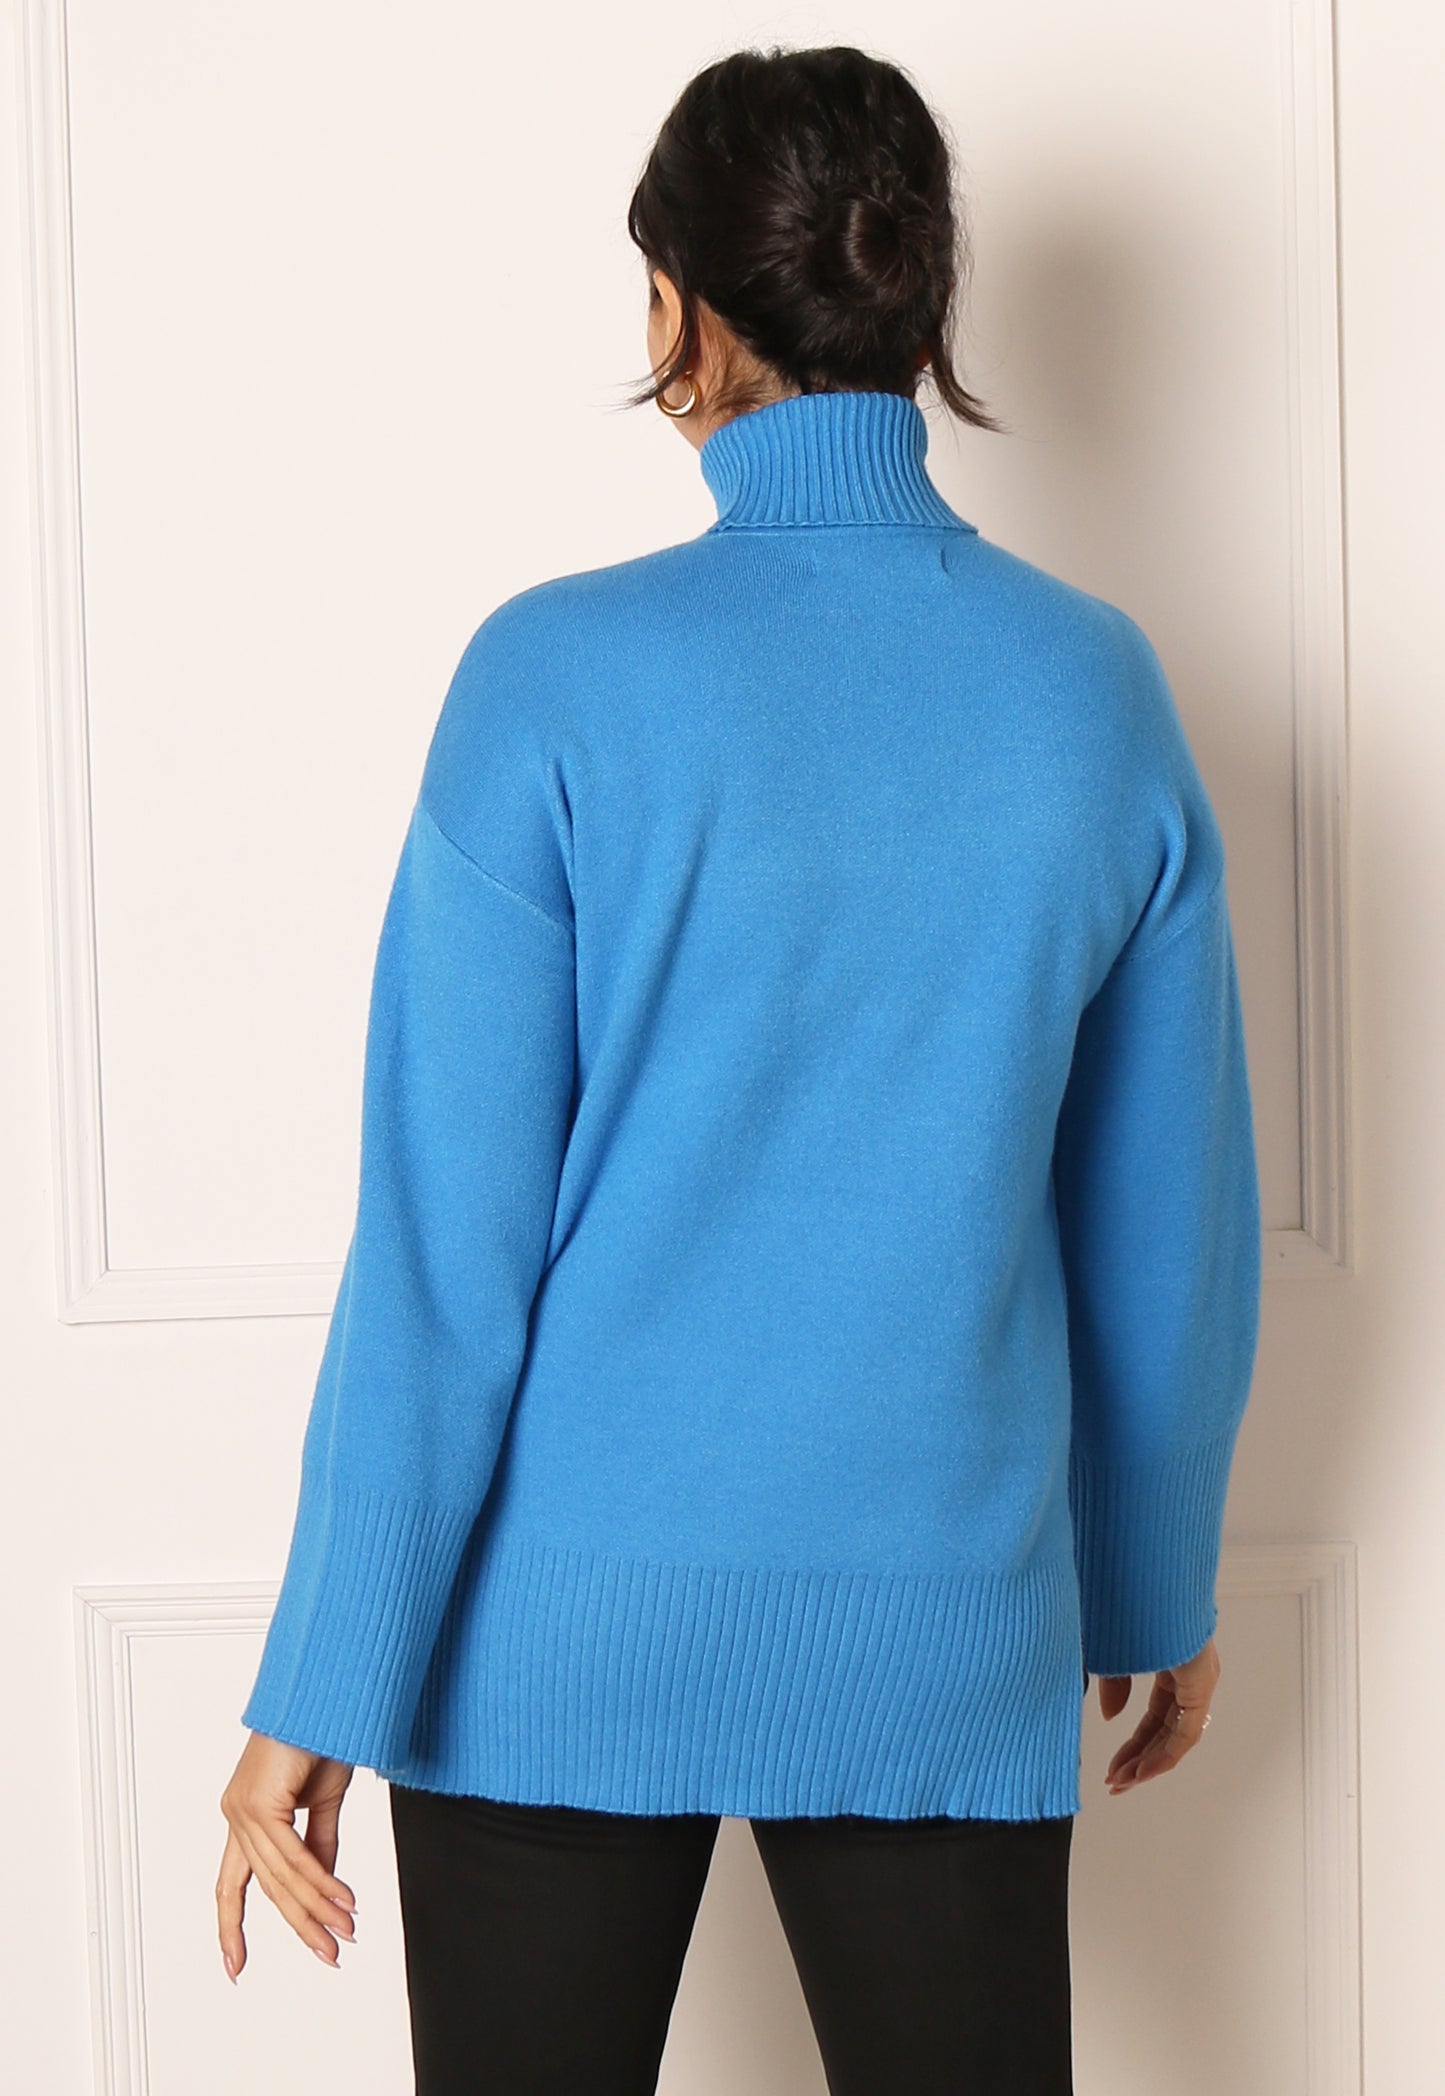 
                  
                    VERO MODA Gold Soft Knit Rollneck Longline Jumper with Side Splits in French Blue - One Nation Clothing
                  
                